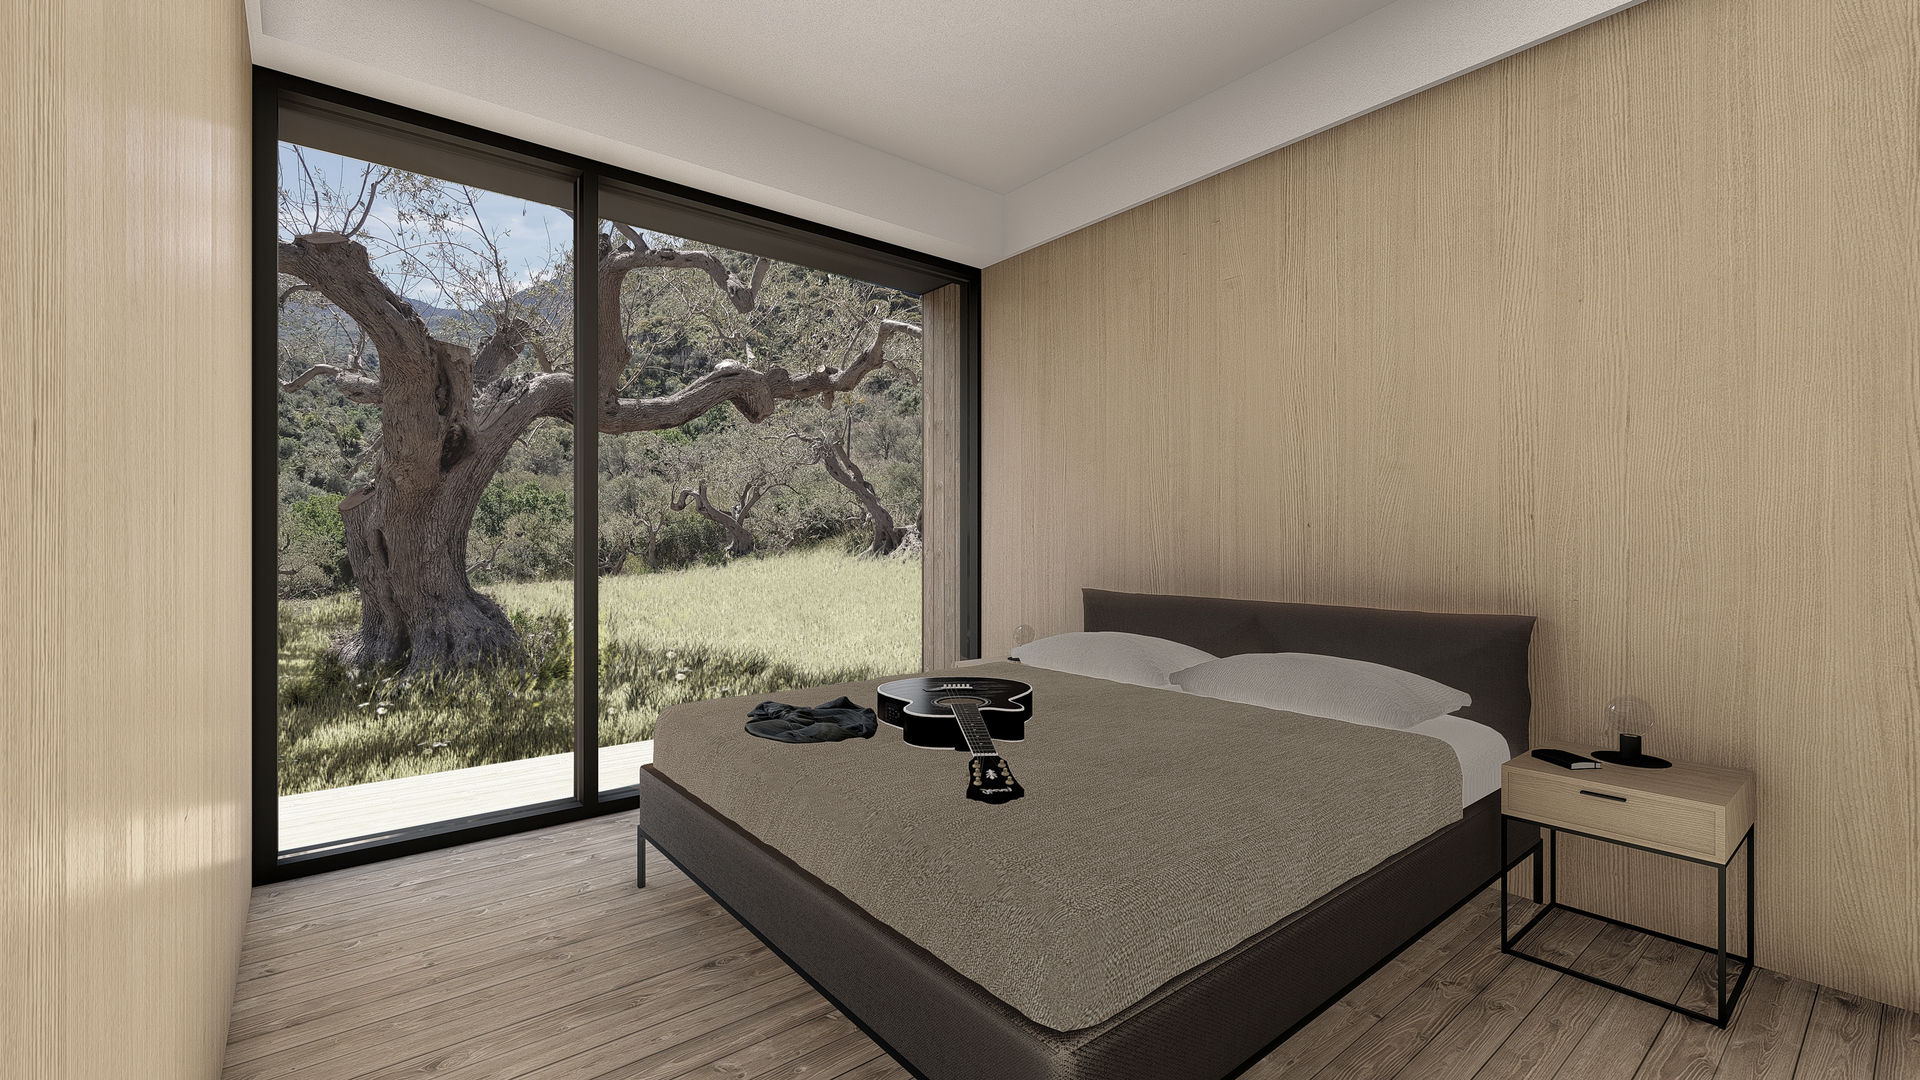 WOODEN HOUSE G|C – SICILY, ALESSIO LO BELLO ARCHITETTO a Palermo ALESSIO LO BELLO ARCHITETTO a Palermo モダンスタイルの寝室 木 木目調 king-size bedroom, glass window, room with a view, queen-size bed, double room